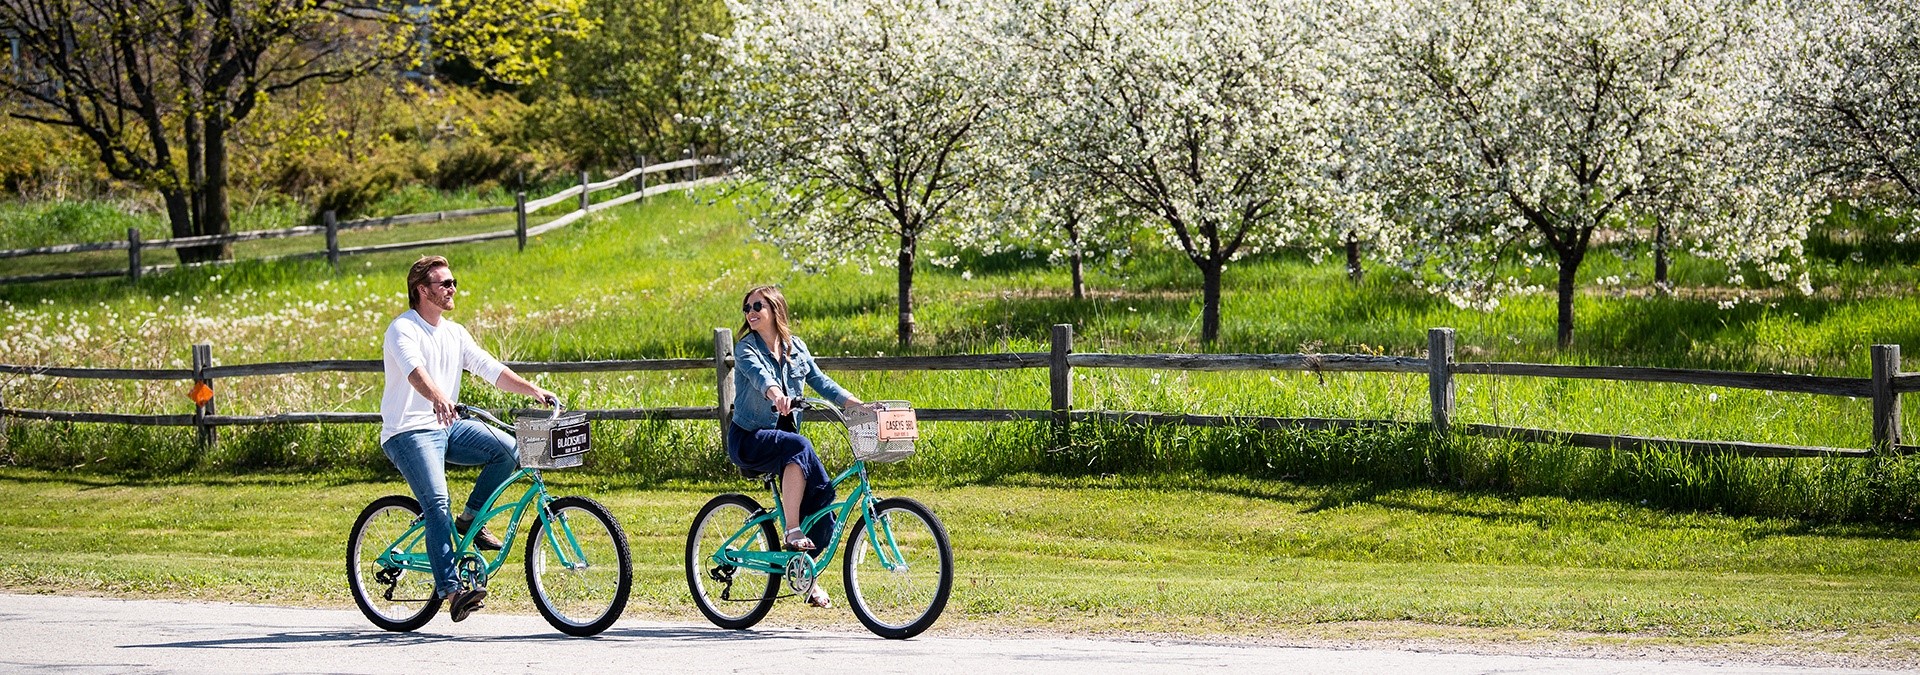 A young couple laughs and rides bikes past a cherry blossoms orchard in bloom.